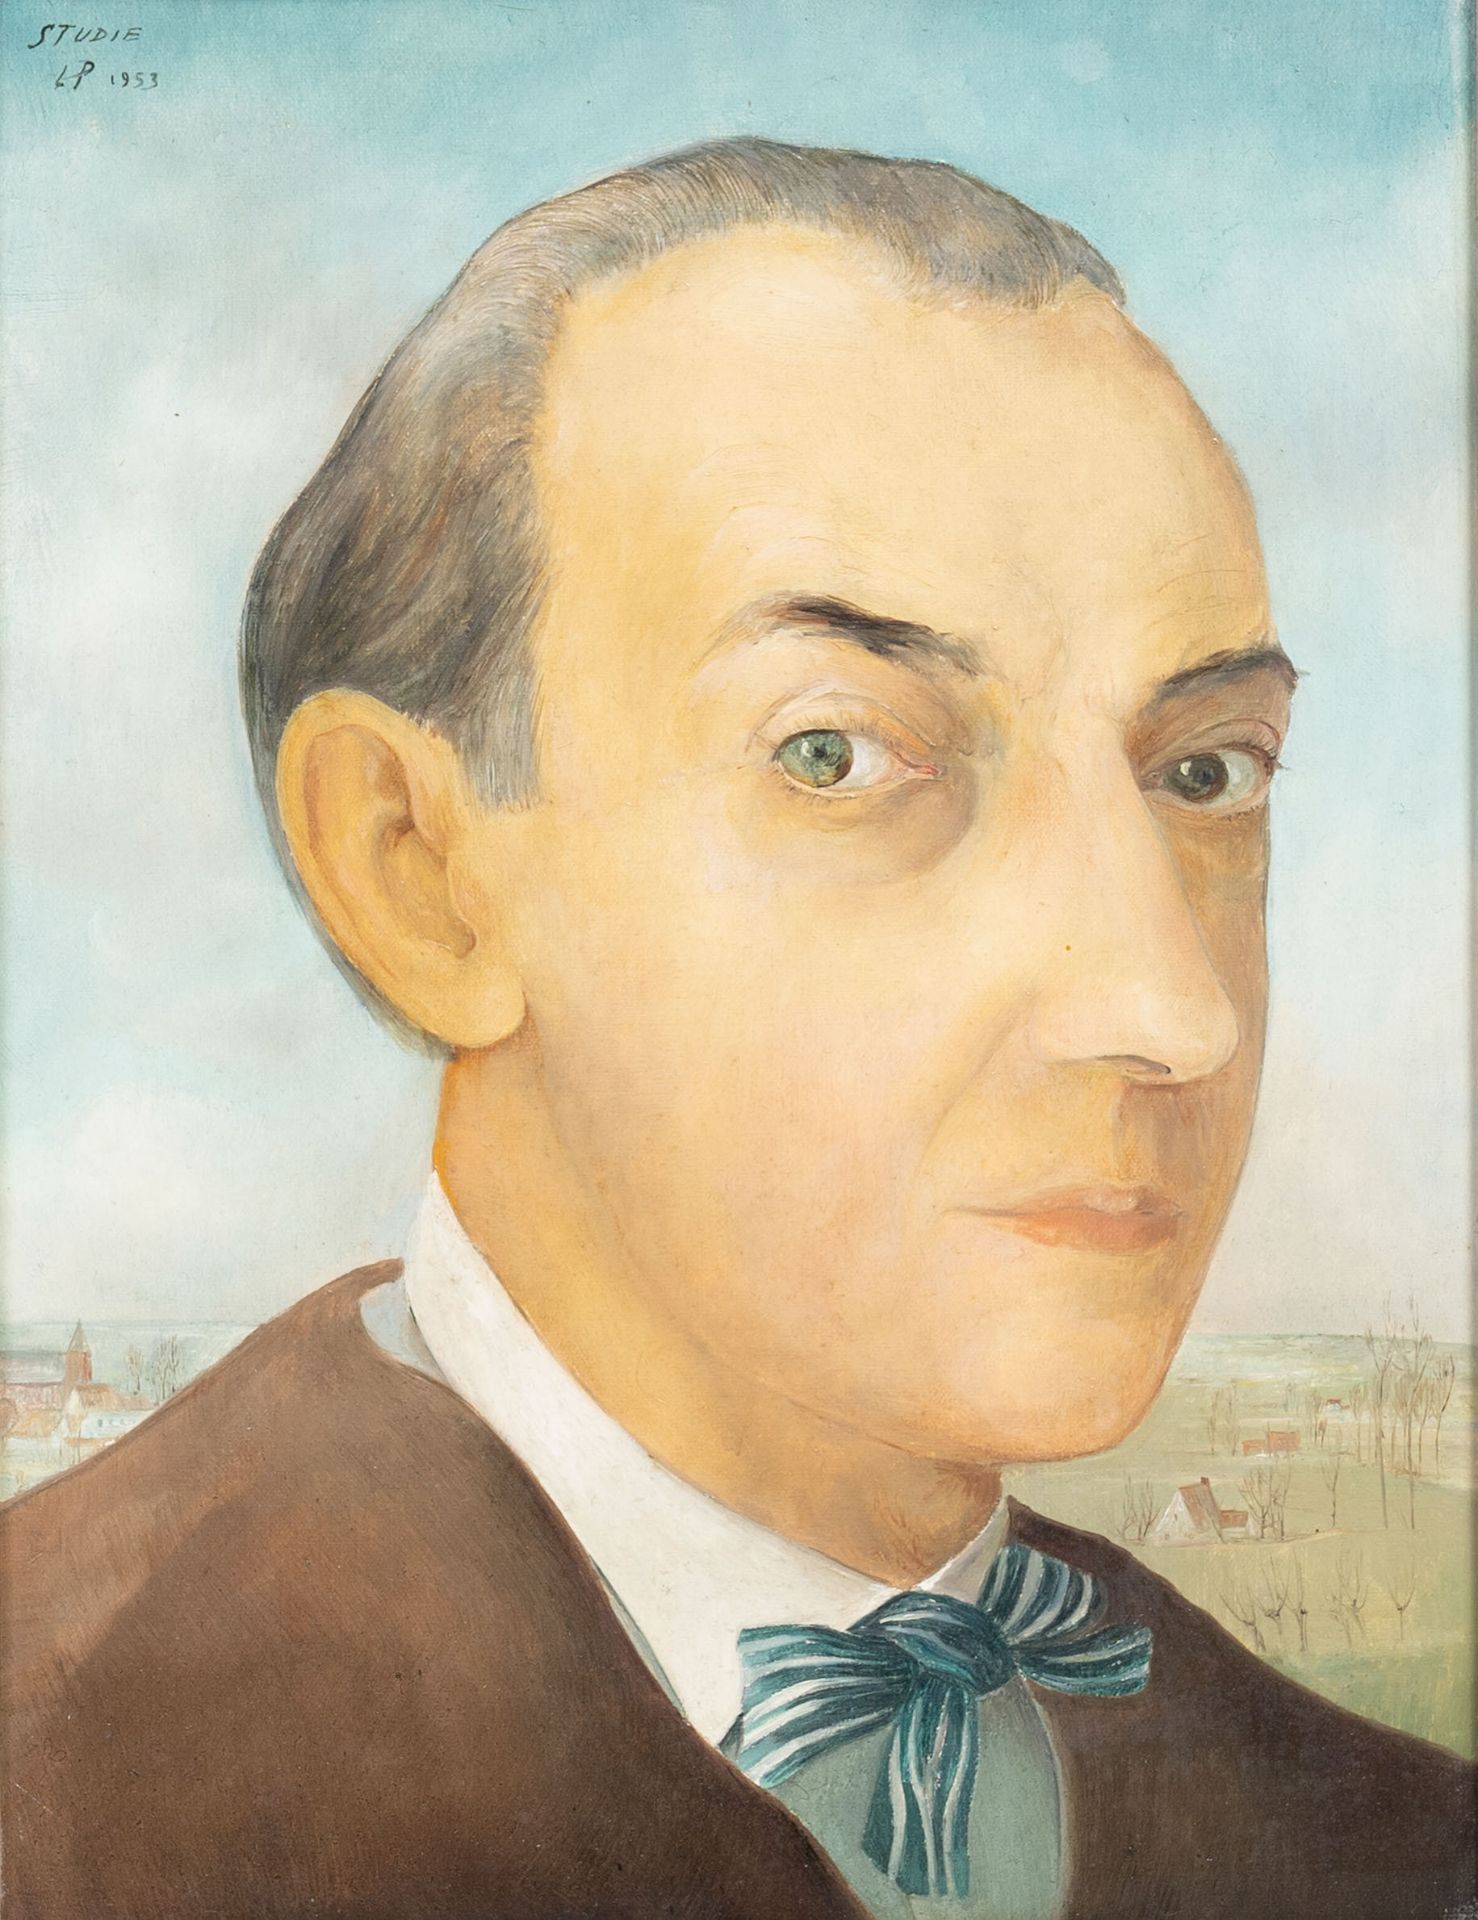 Leo Piron (1899-1962): 'Studie' (Self-portrait of the artist), oil on canvas, dated 1953